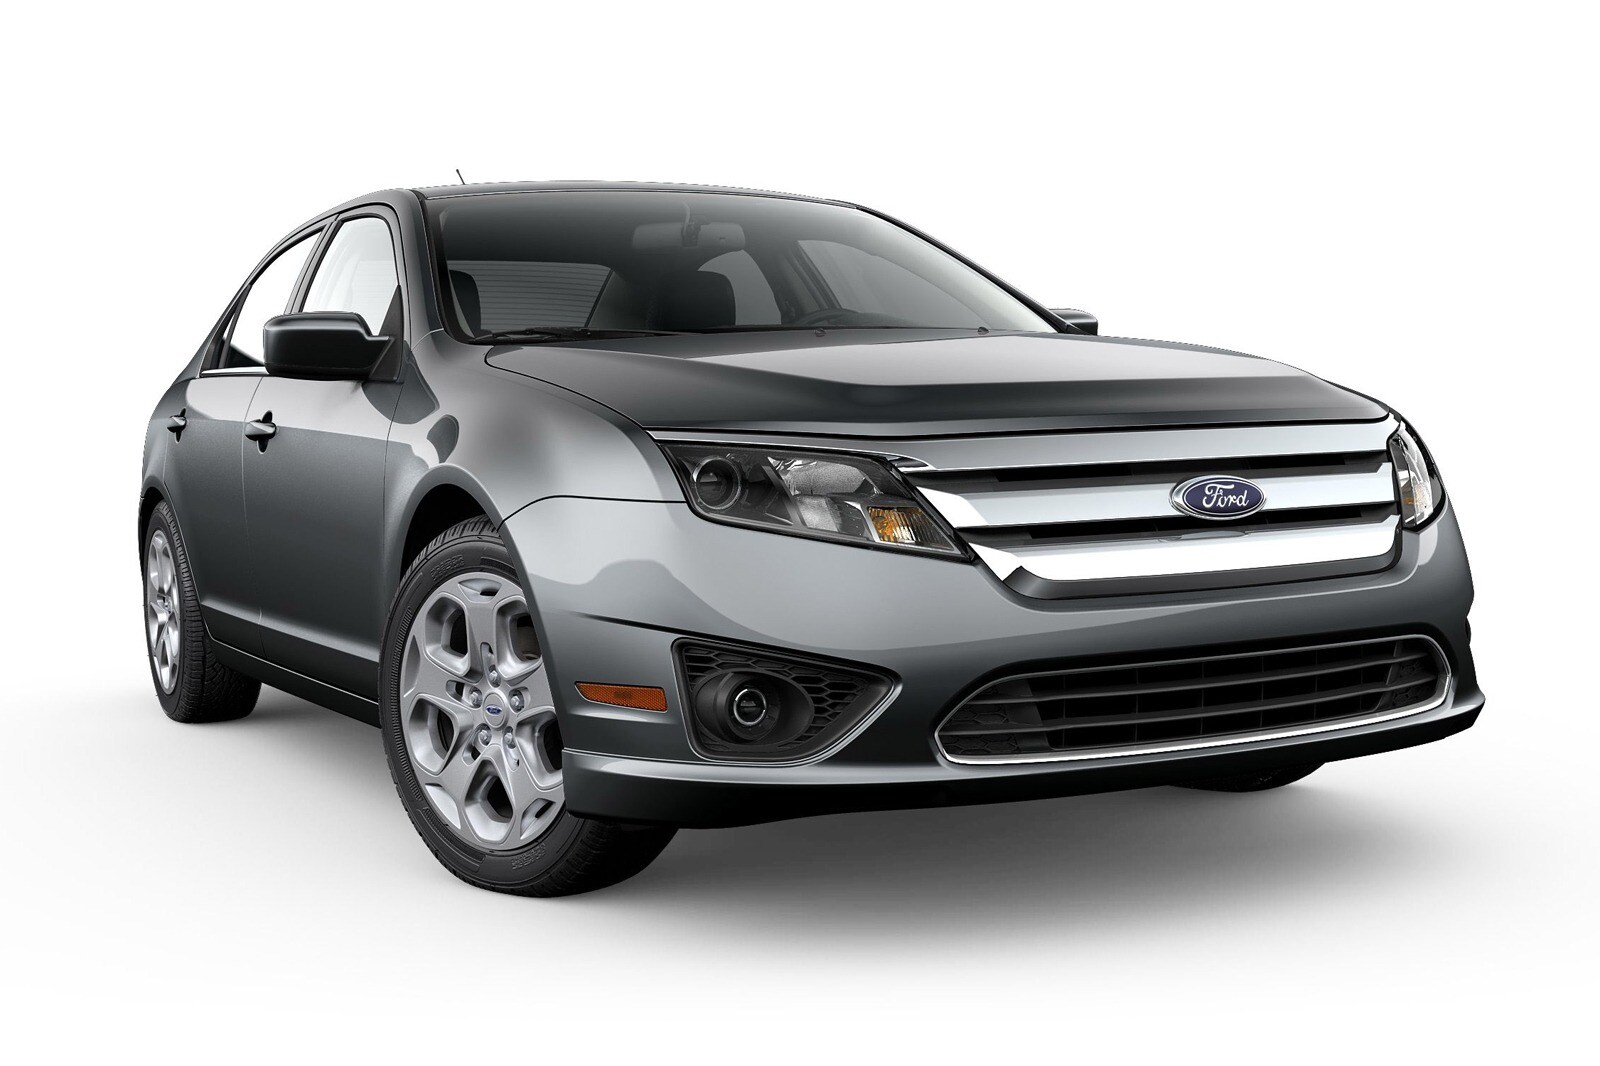 Feds Close Probe Into 2010-'12 Ford Fusion for Electric Power Steering